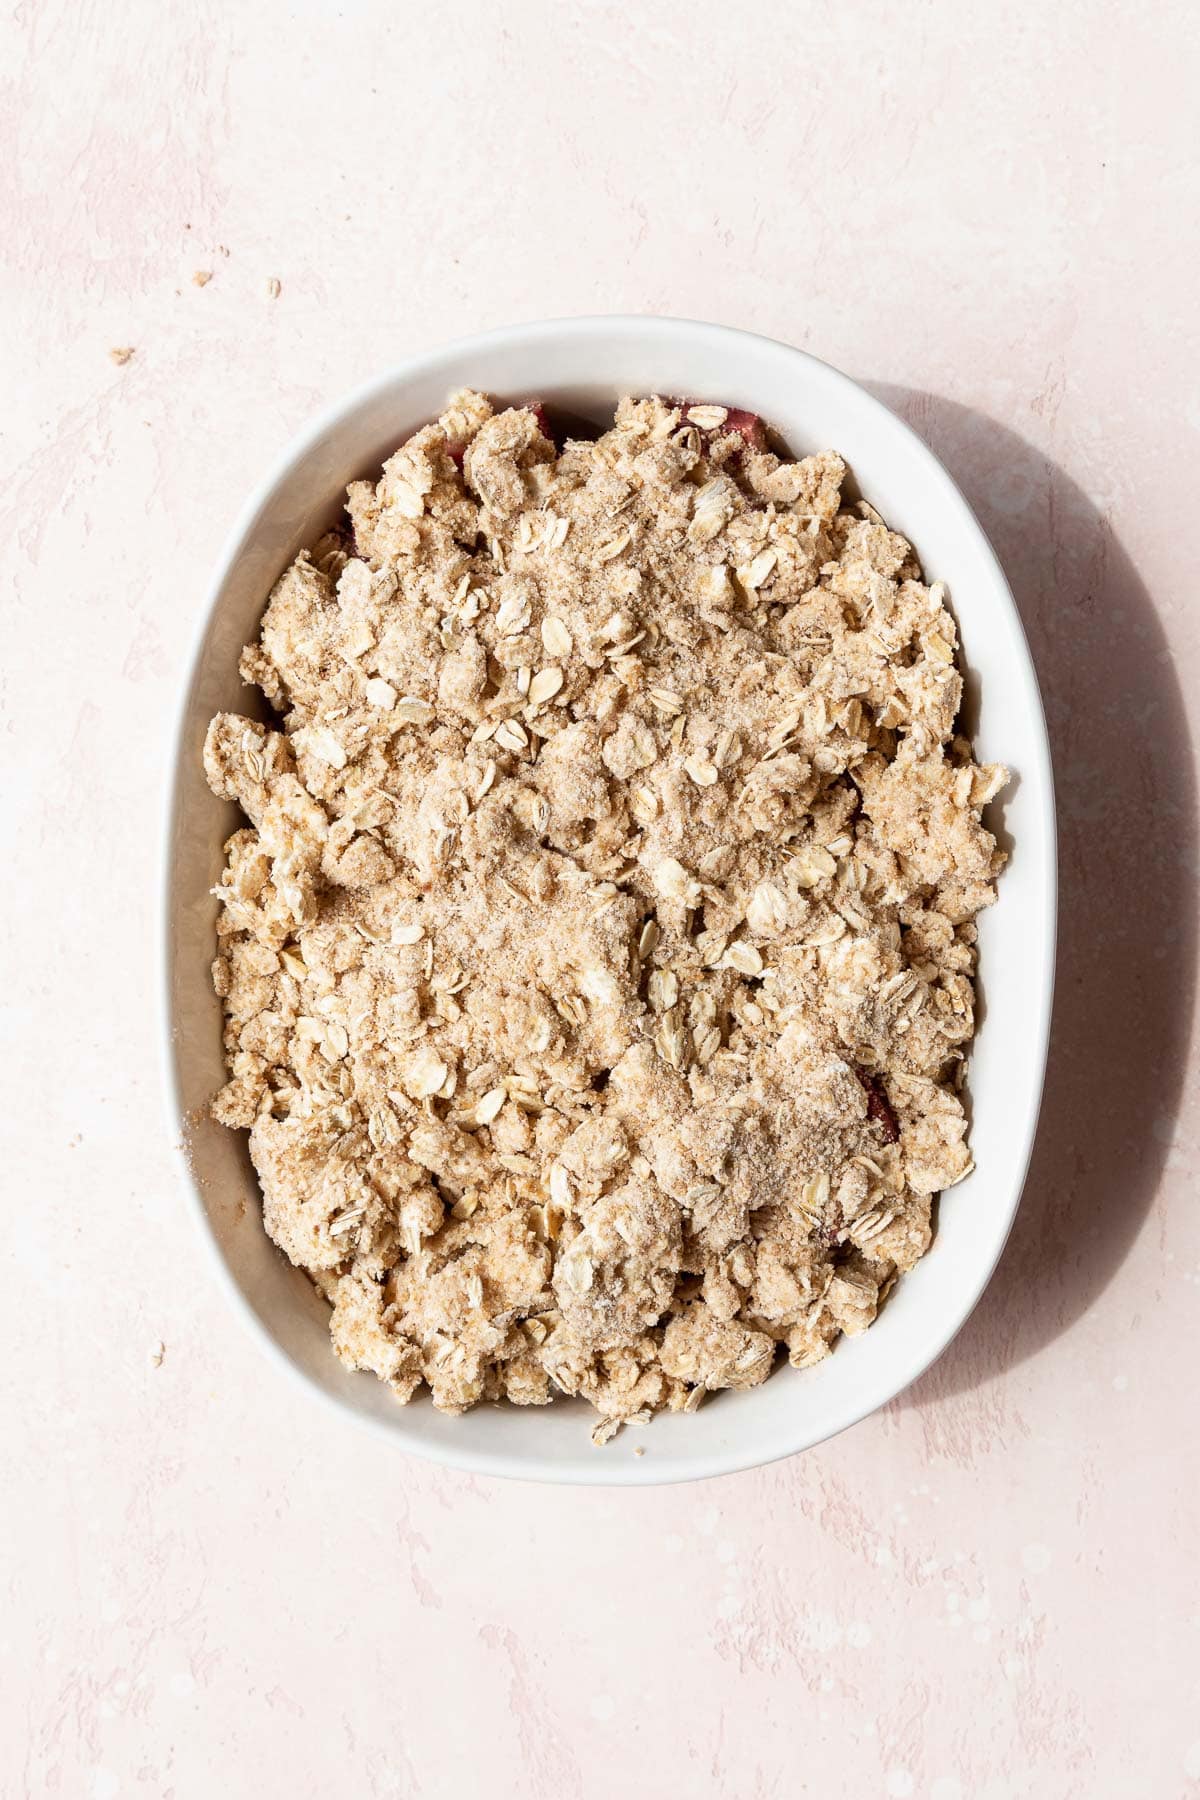 Gluten-free oatmeal crumble added on top of the rhubarb filling.